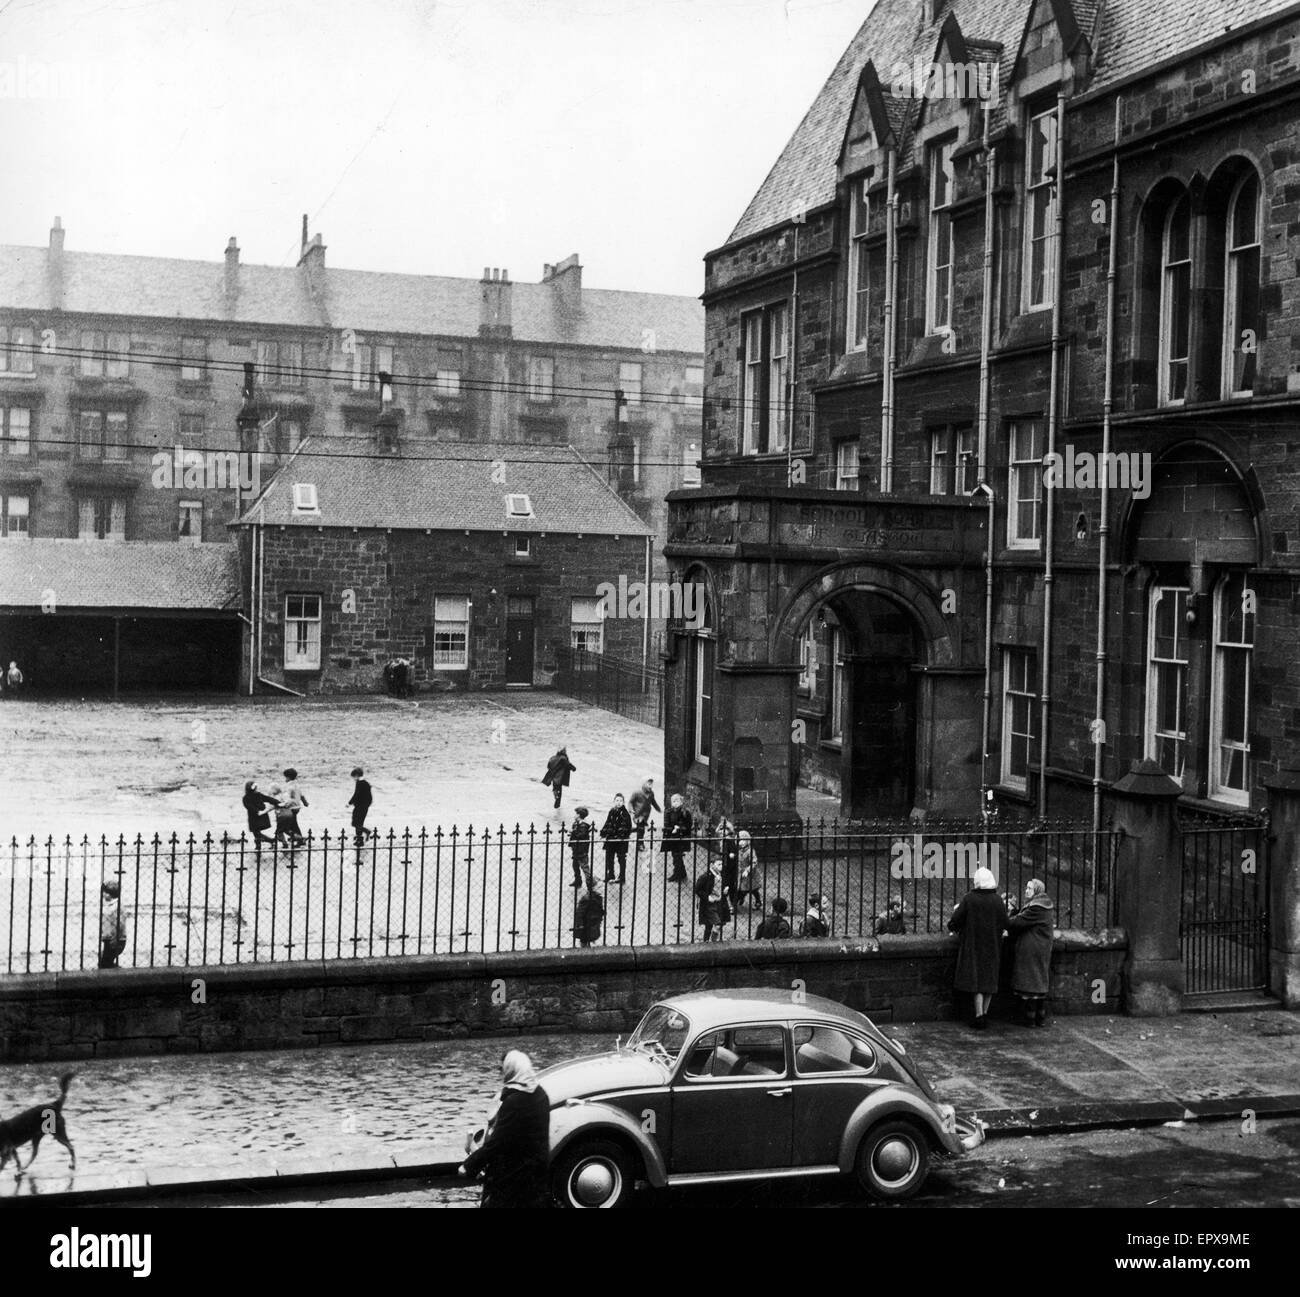 Ian Brady Childhood Background. Pictures taken December 1965. Ian Brady, then known as Ian Sloan, grew up in Camden Street, Gorbals area of Glasgow, Scotland. Pictured, Camden Street Primary School, which he attended. Stock Photo